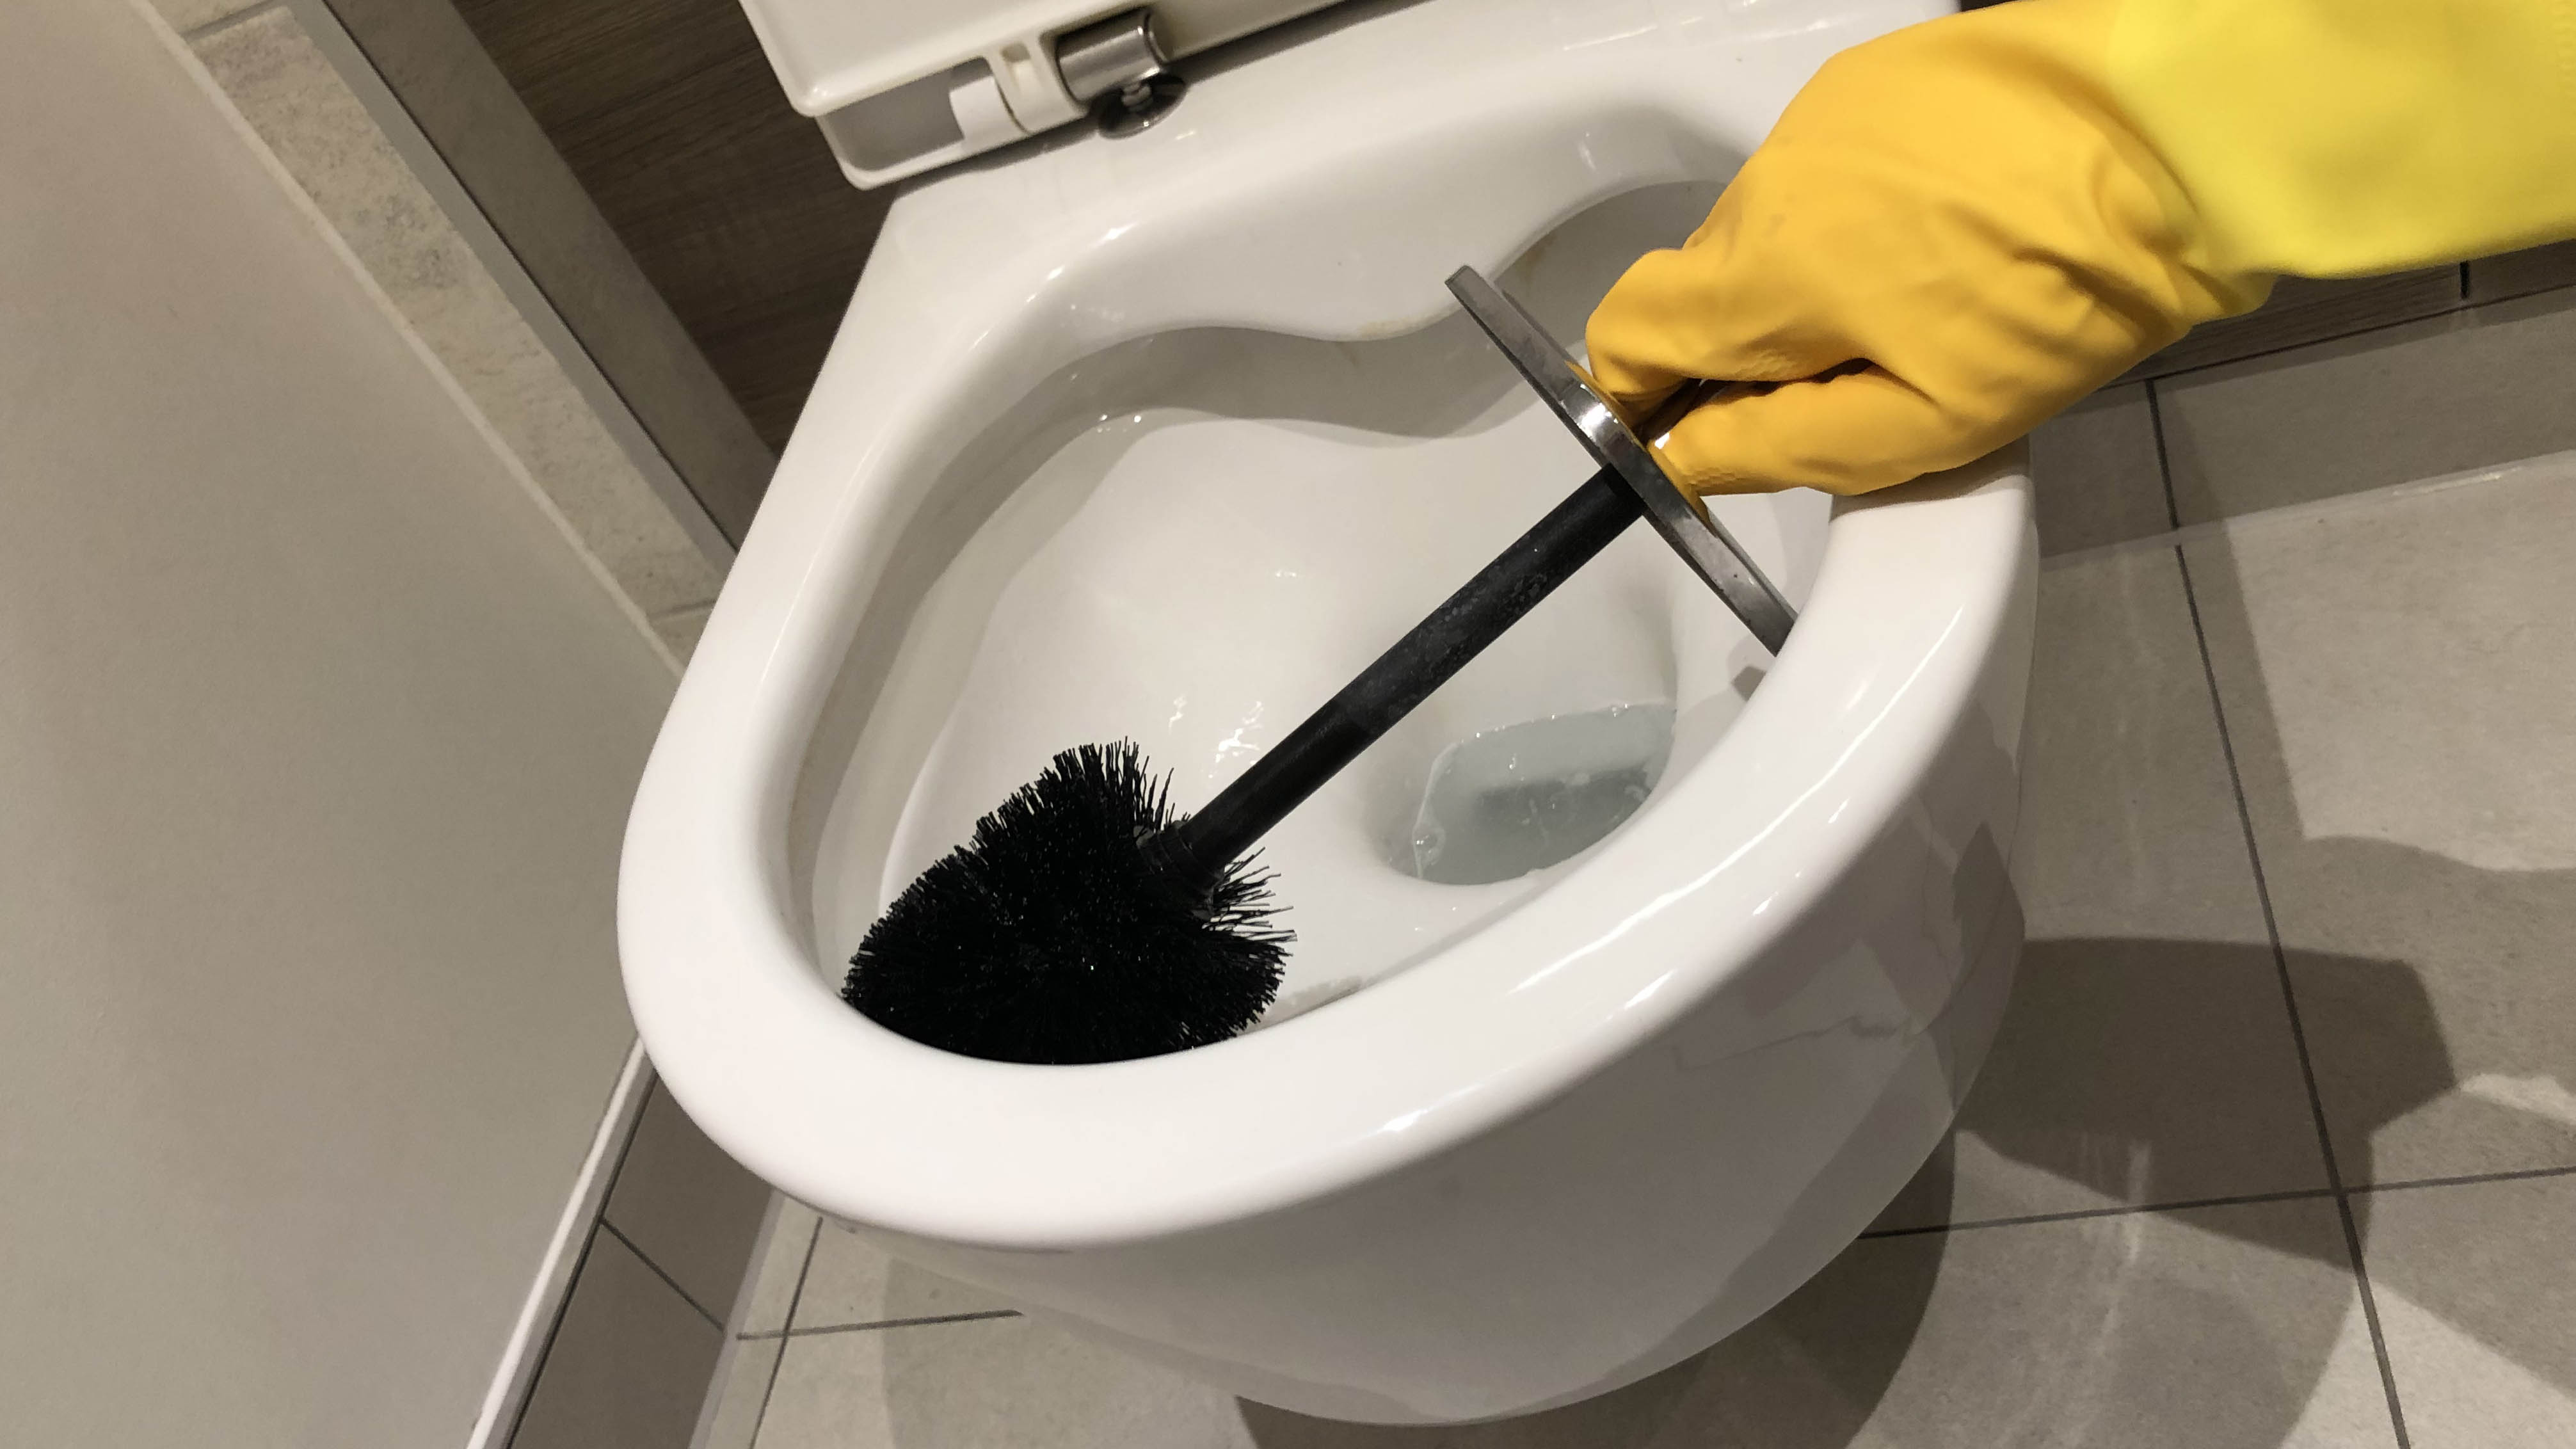 A toilet bowl is cleaned with a toilet brush